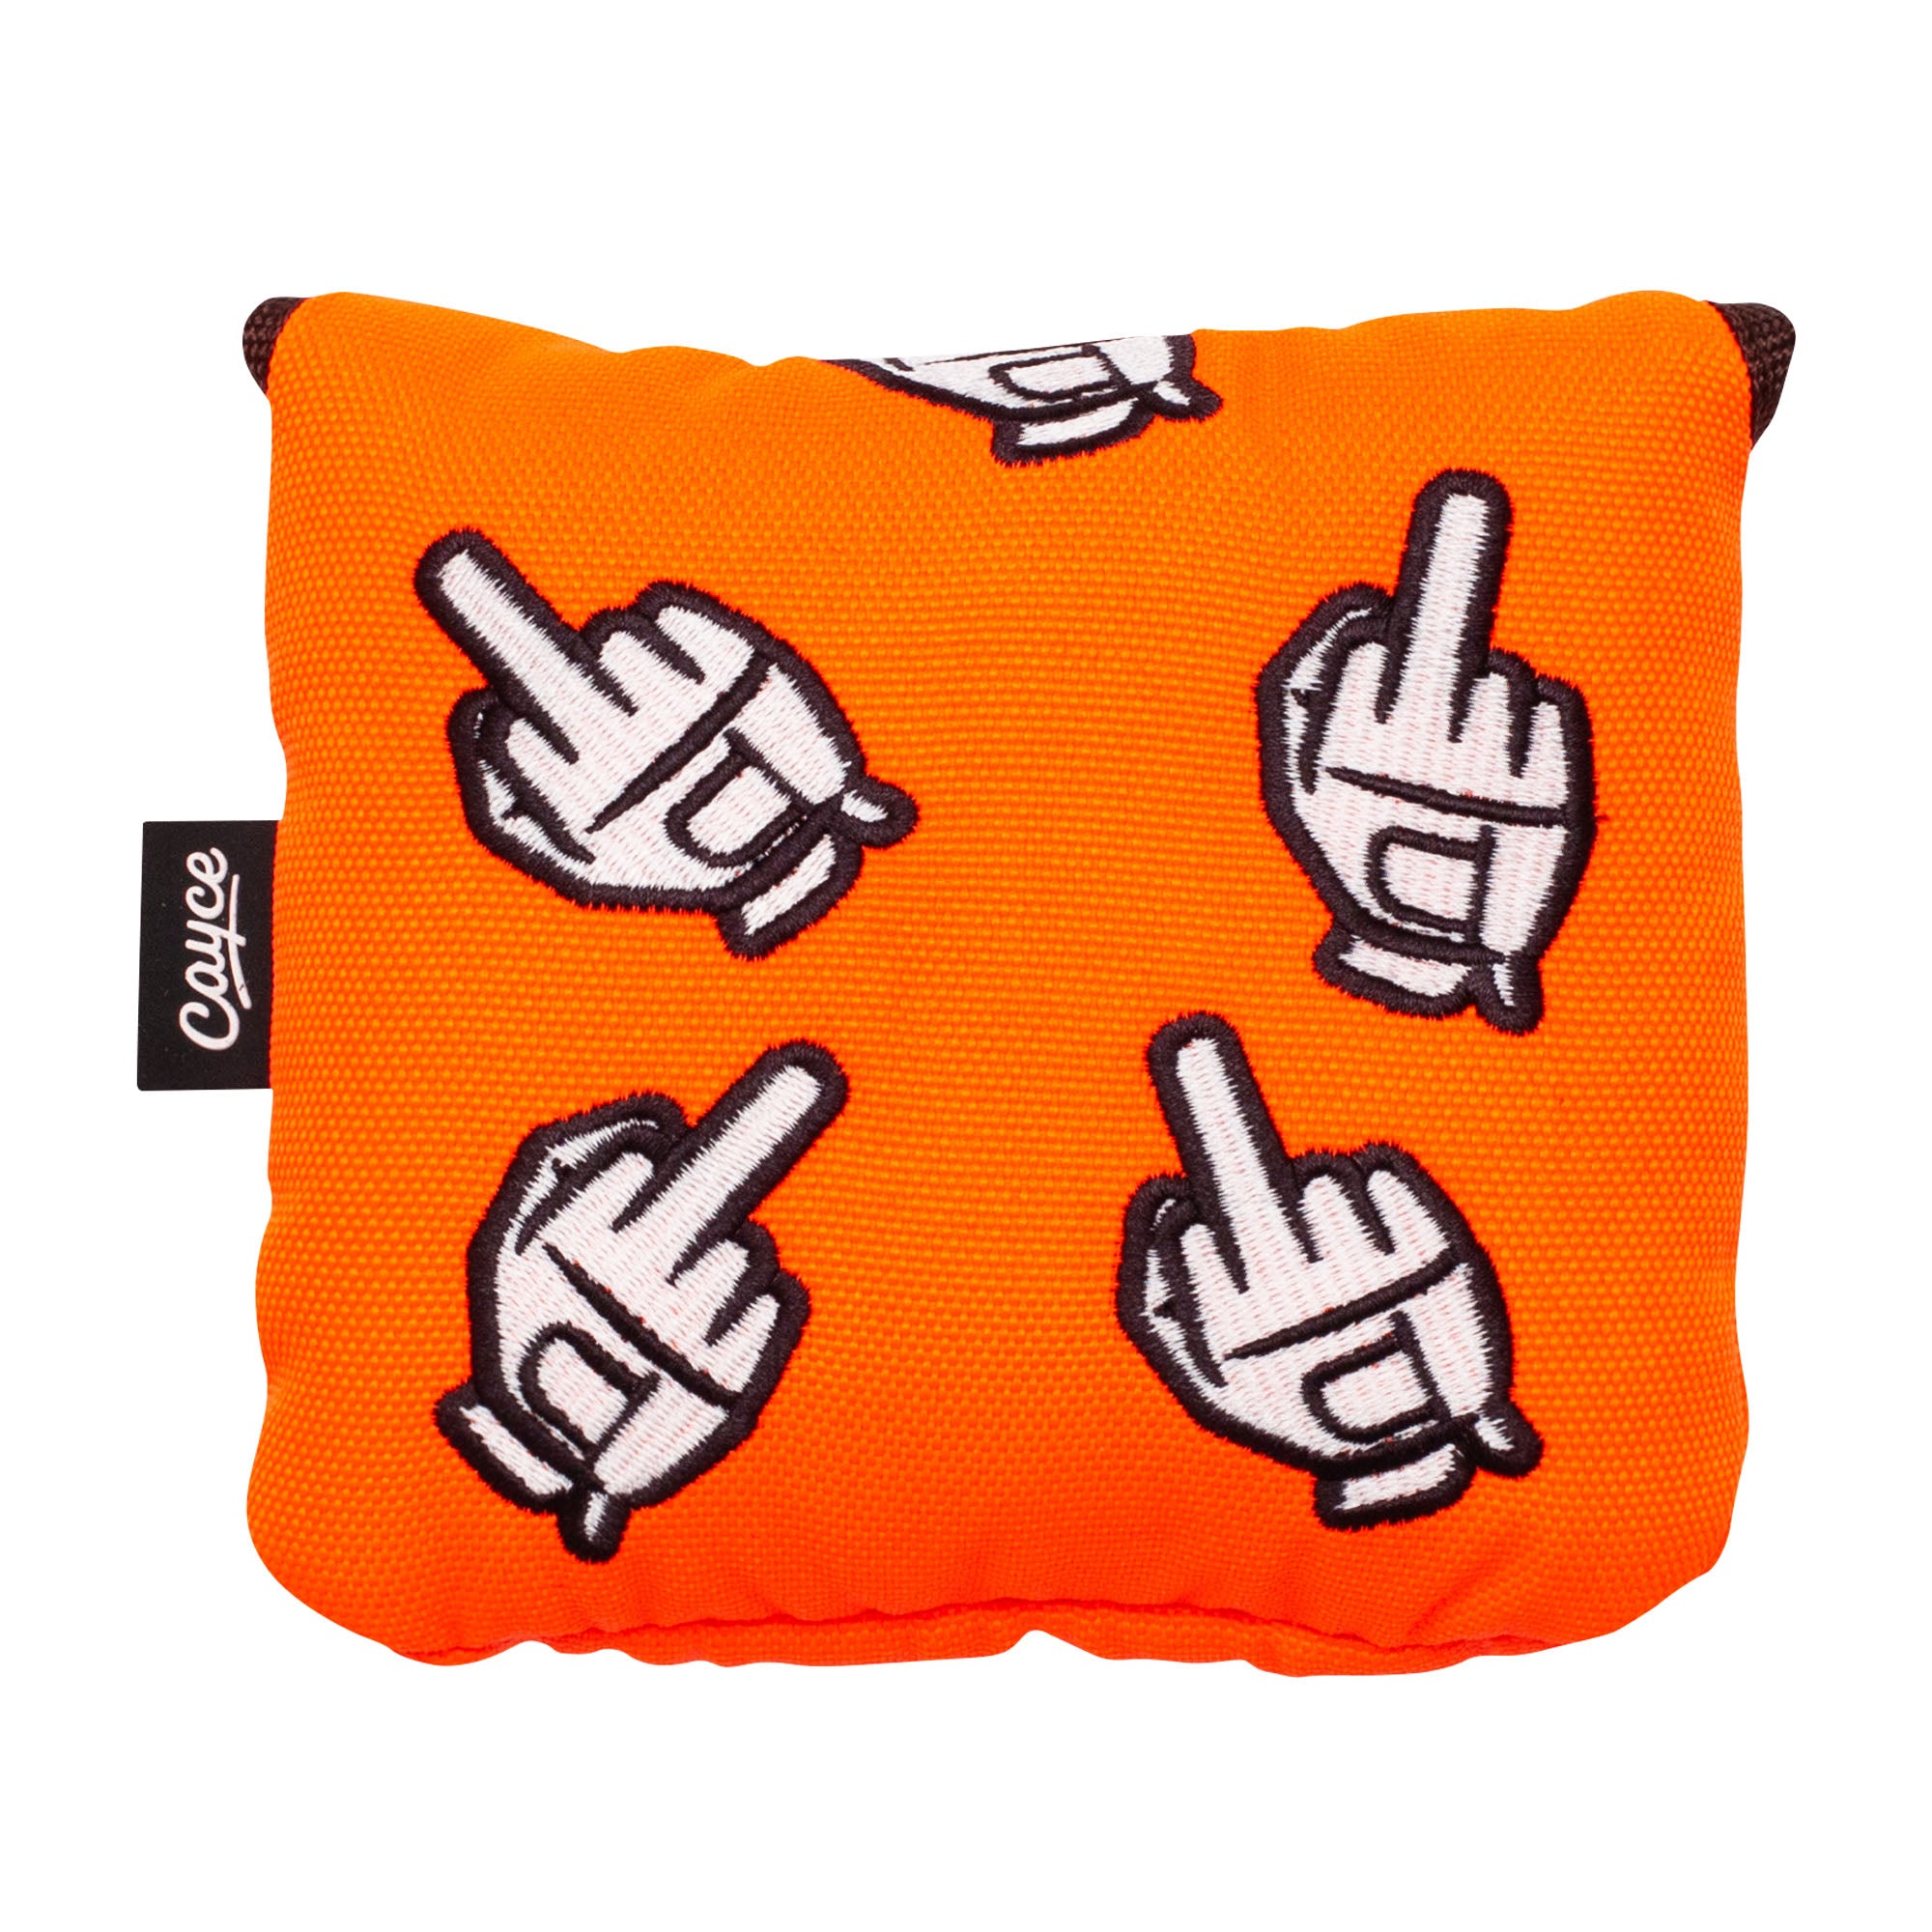 A fluorescent orange, square, magnetic mallet putter headcover with embroidered middle fingers in golf gloves.